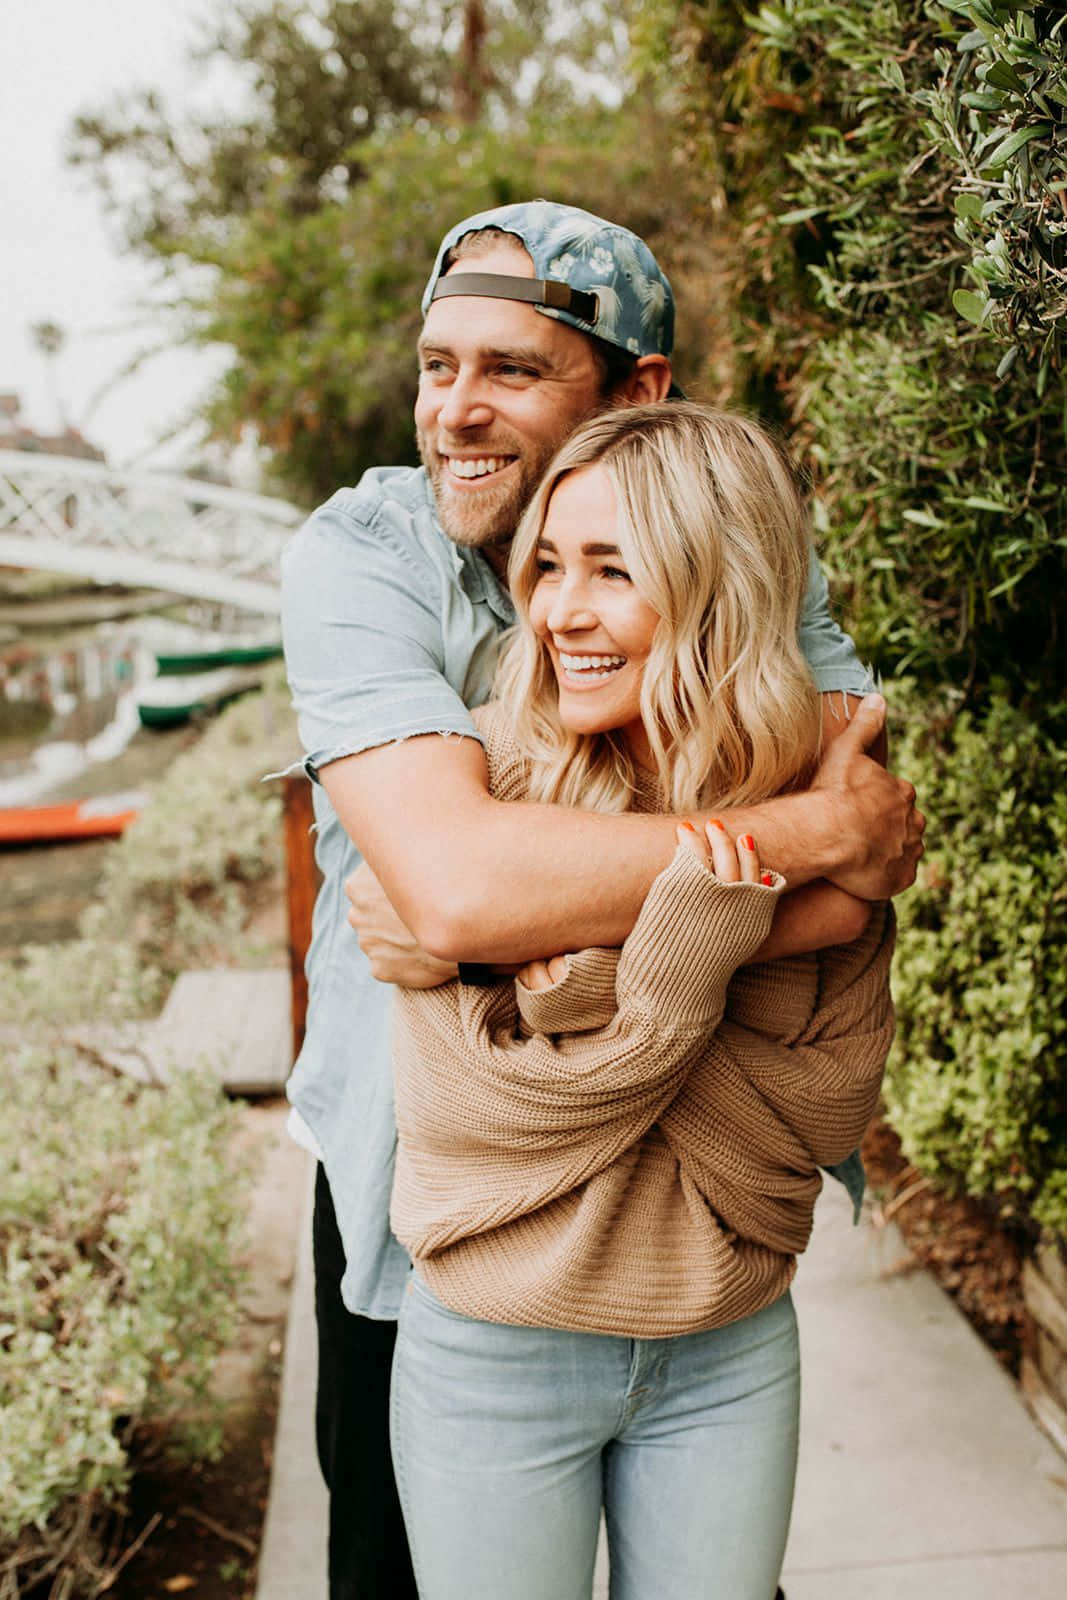 Happy boyfriend carrying girlfriend on back in countryside · Free Stock  Photo